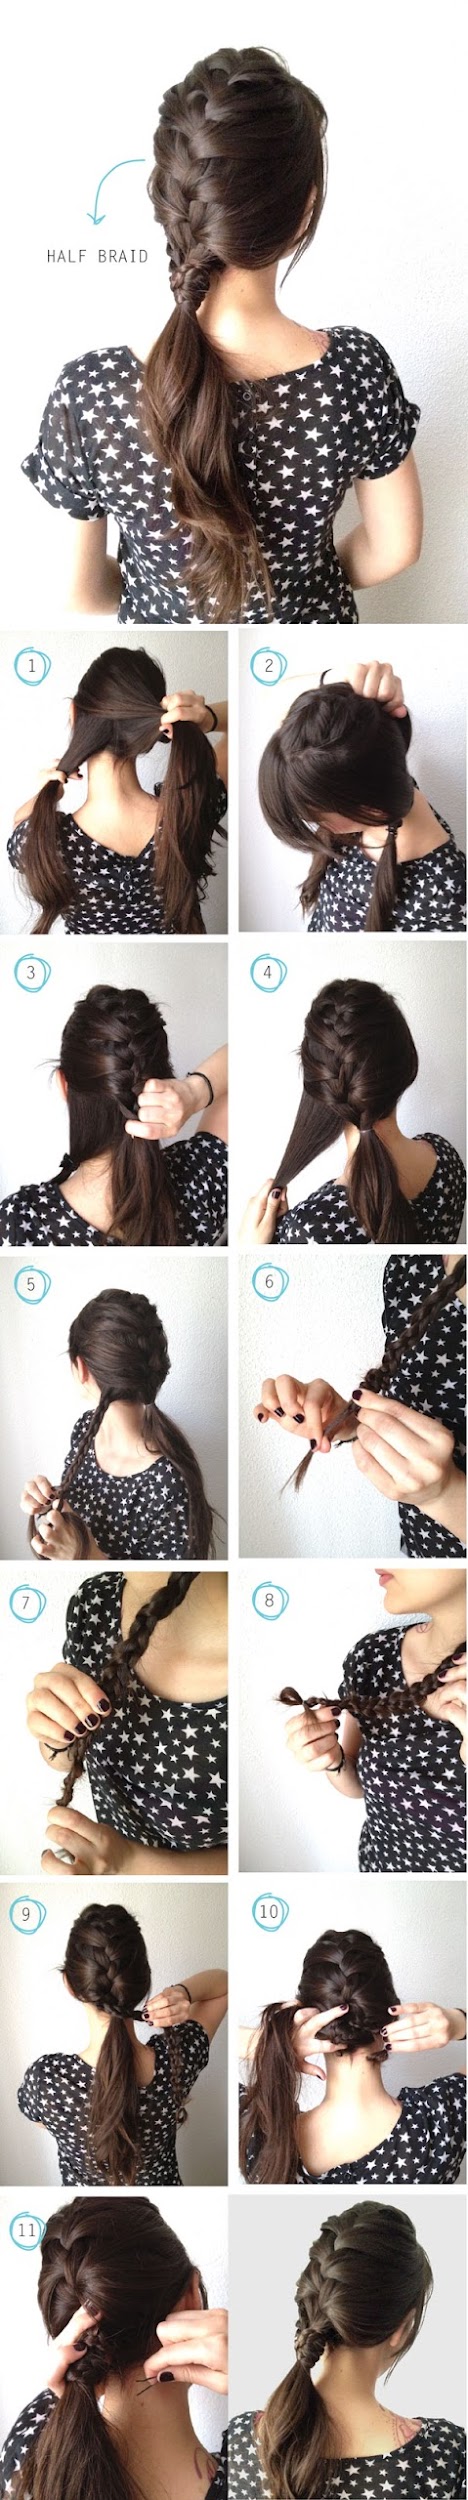 How to make half braid for your hair